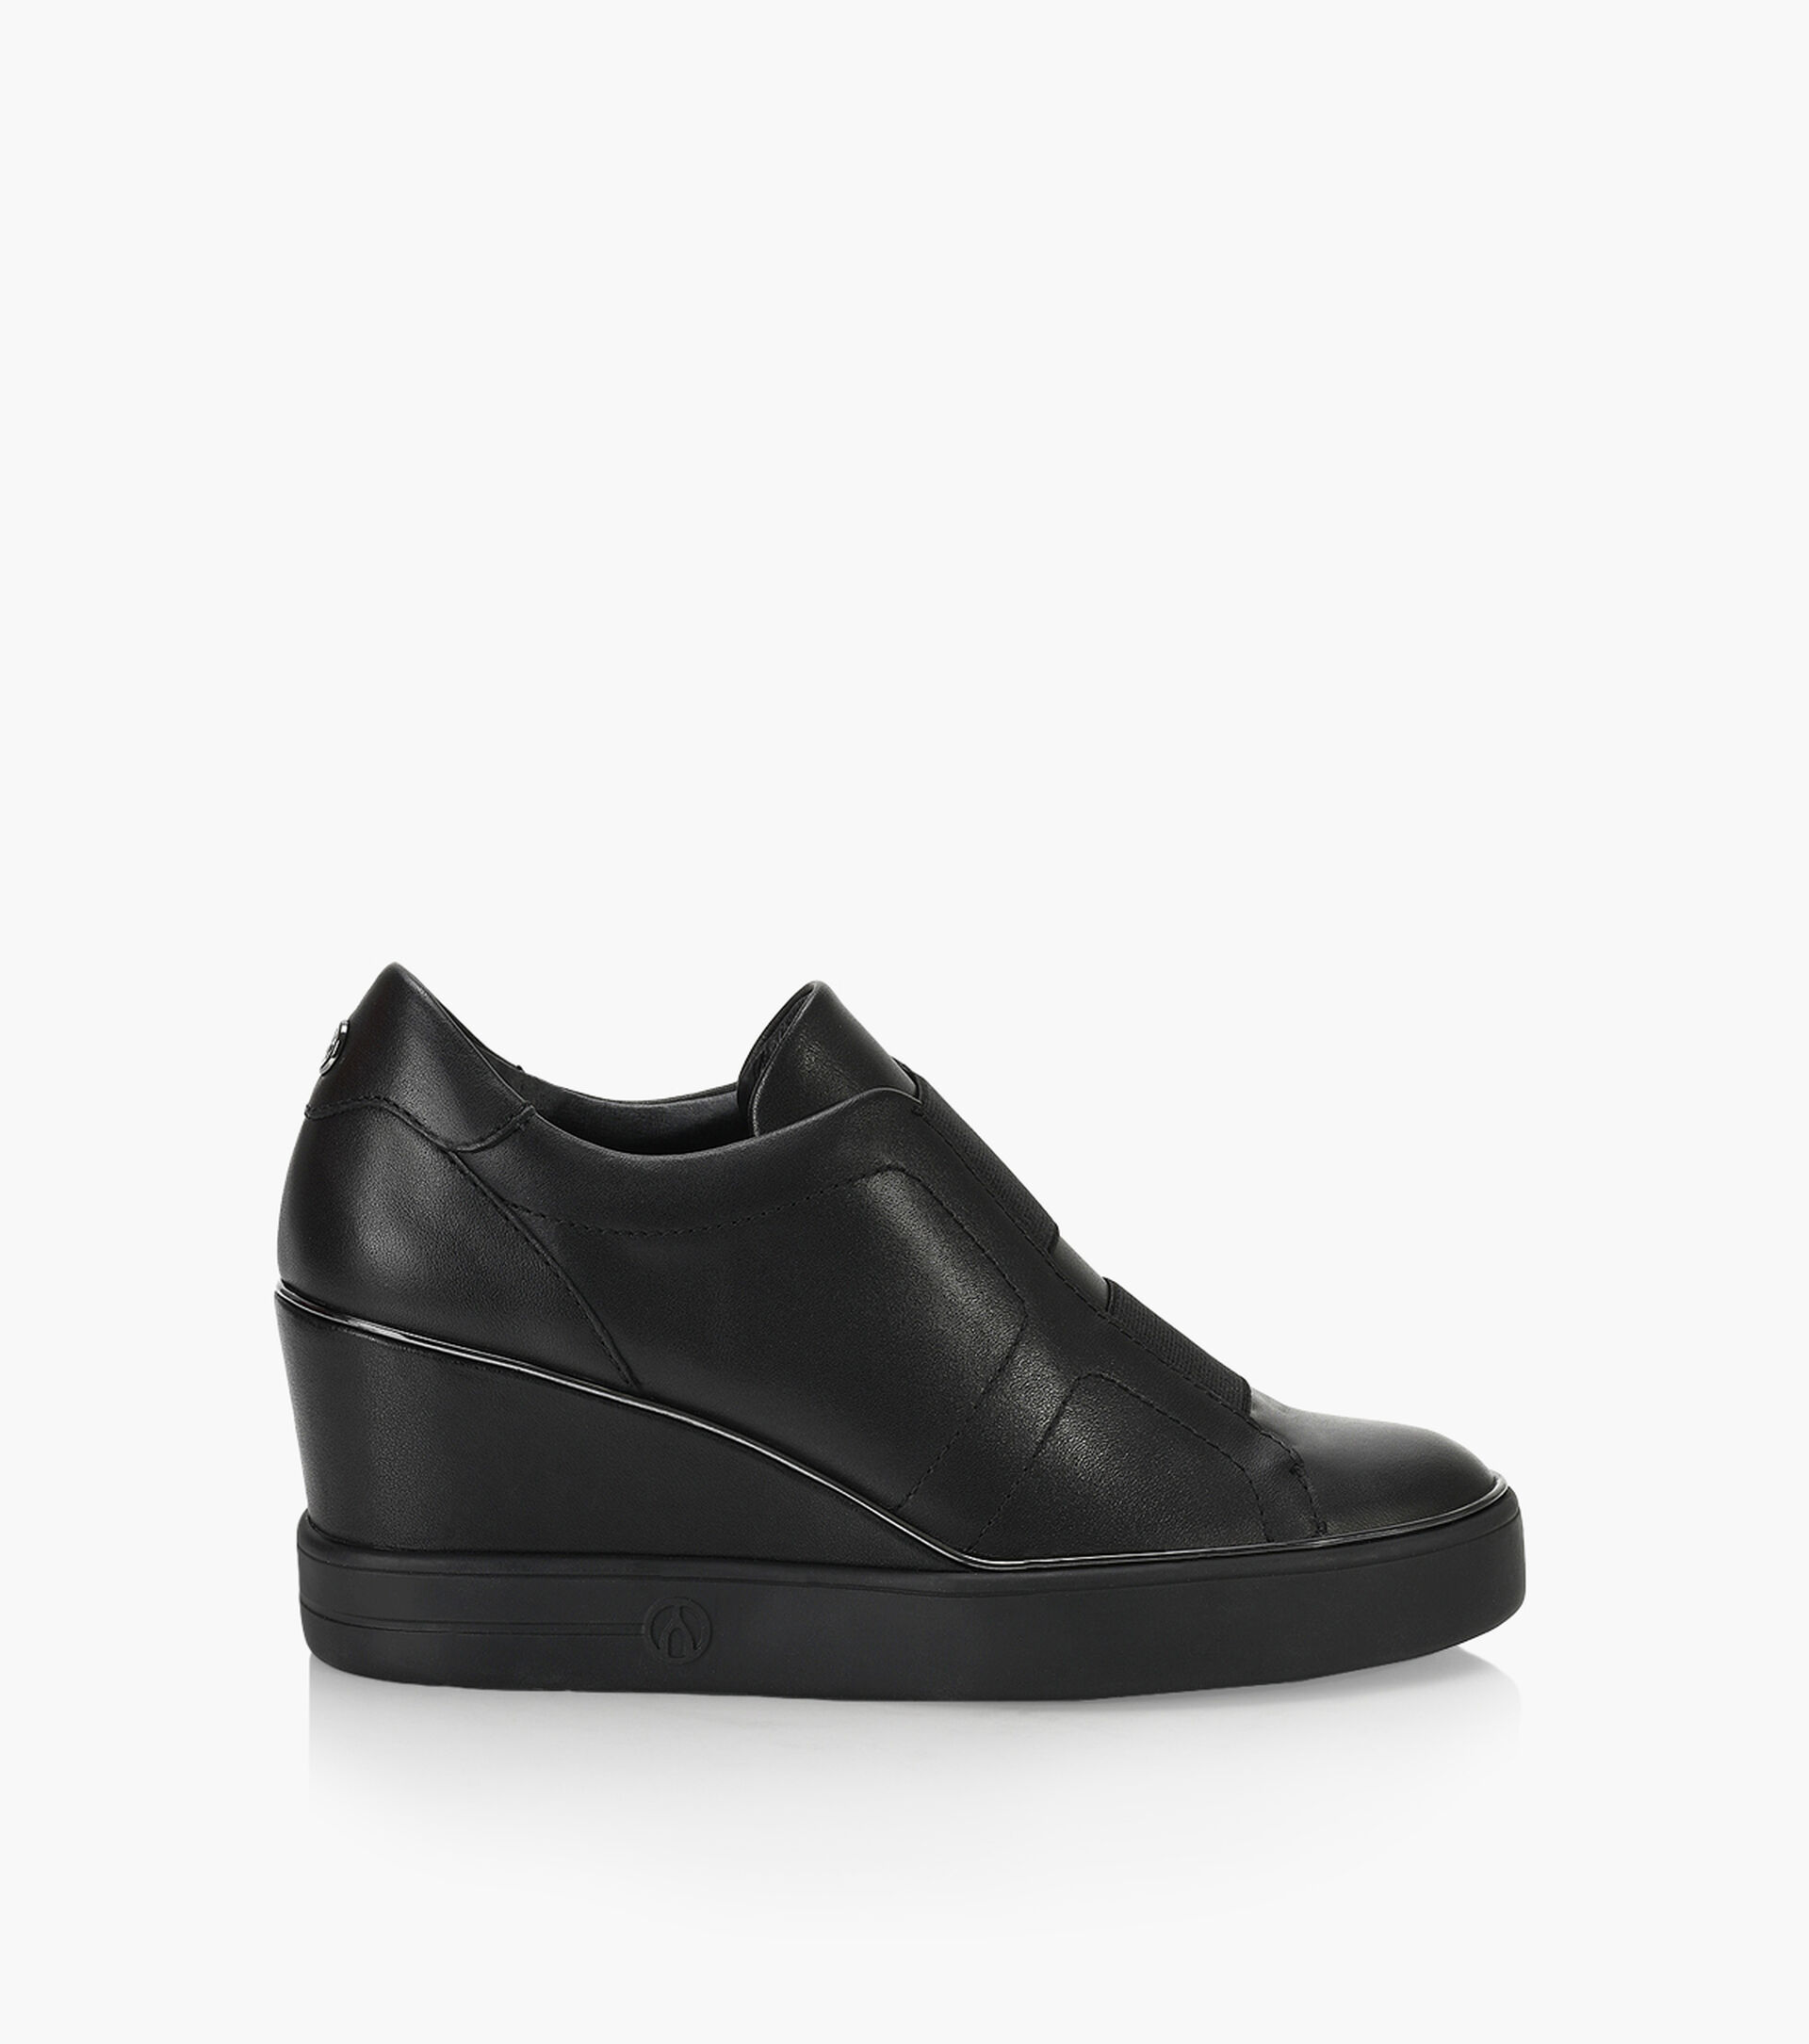 WISHBONE ELEANOR - Black Leather | Browns Shoes